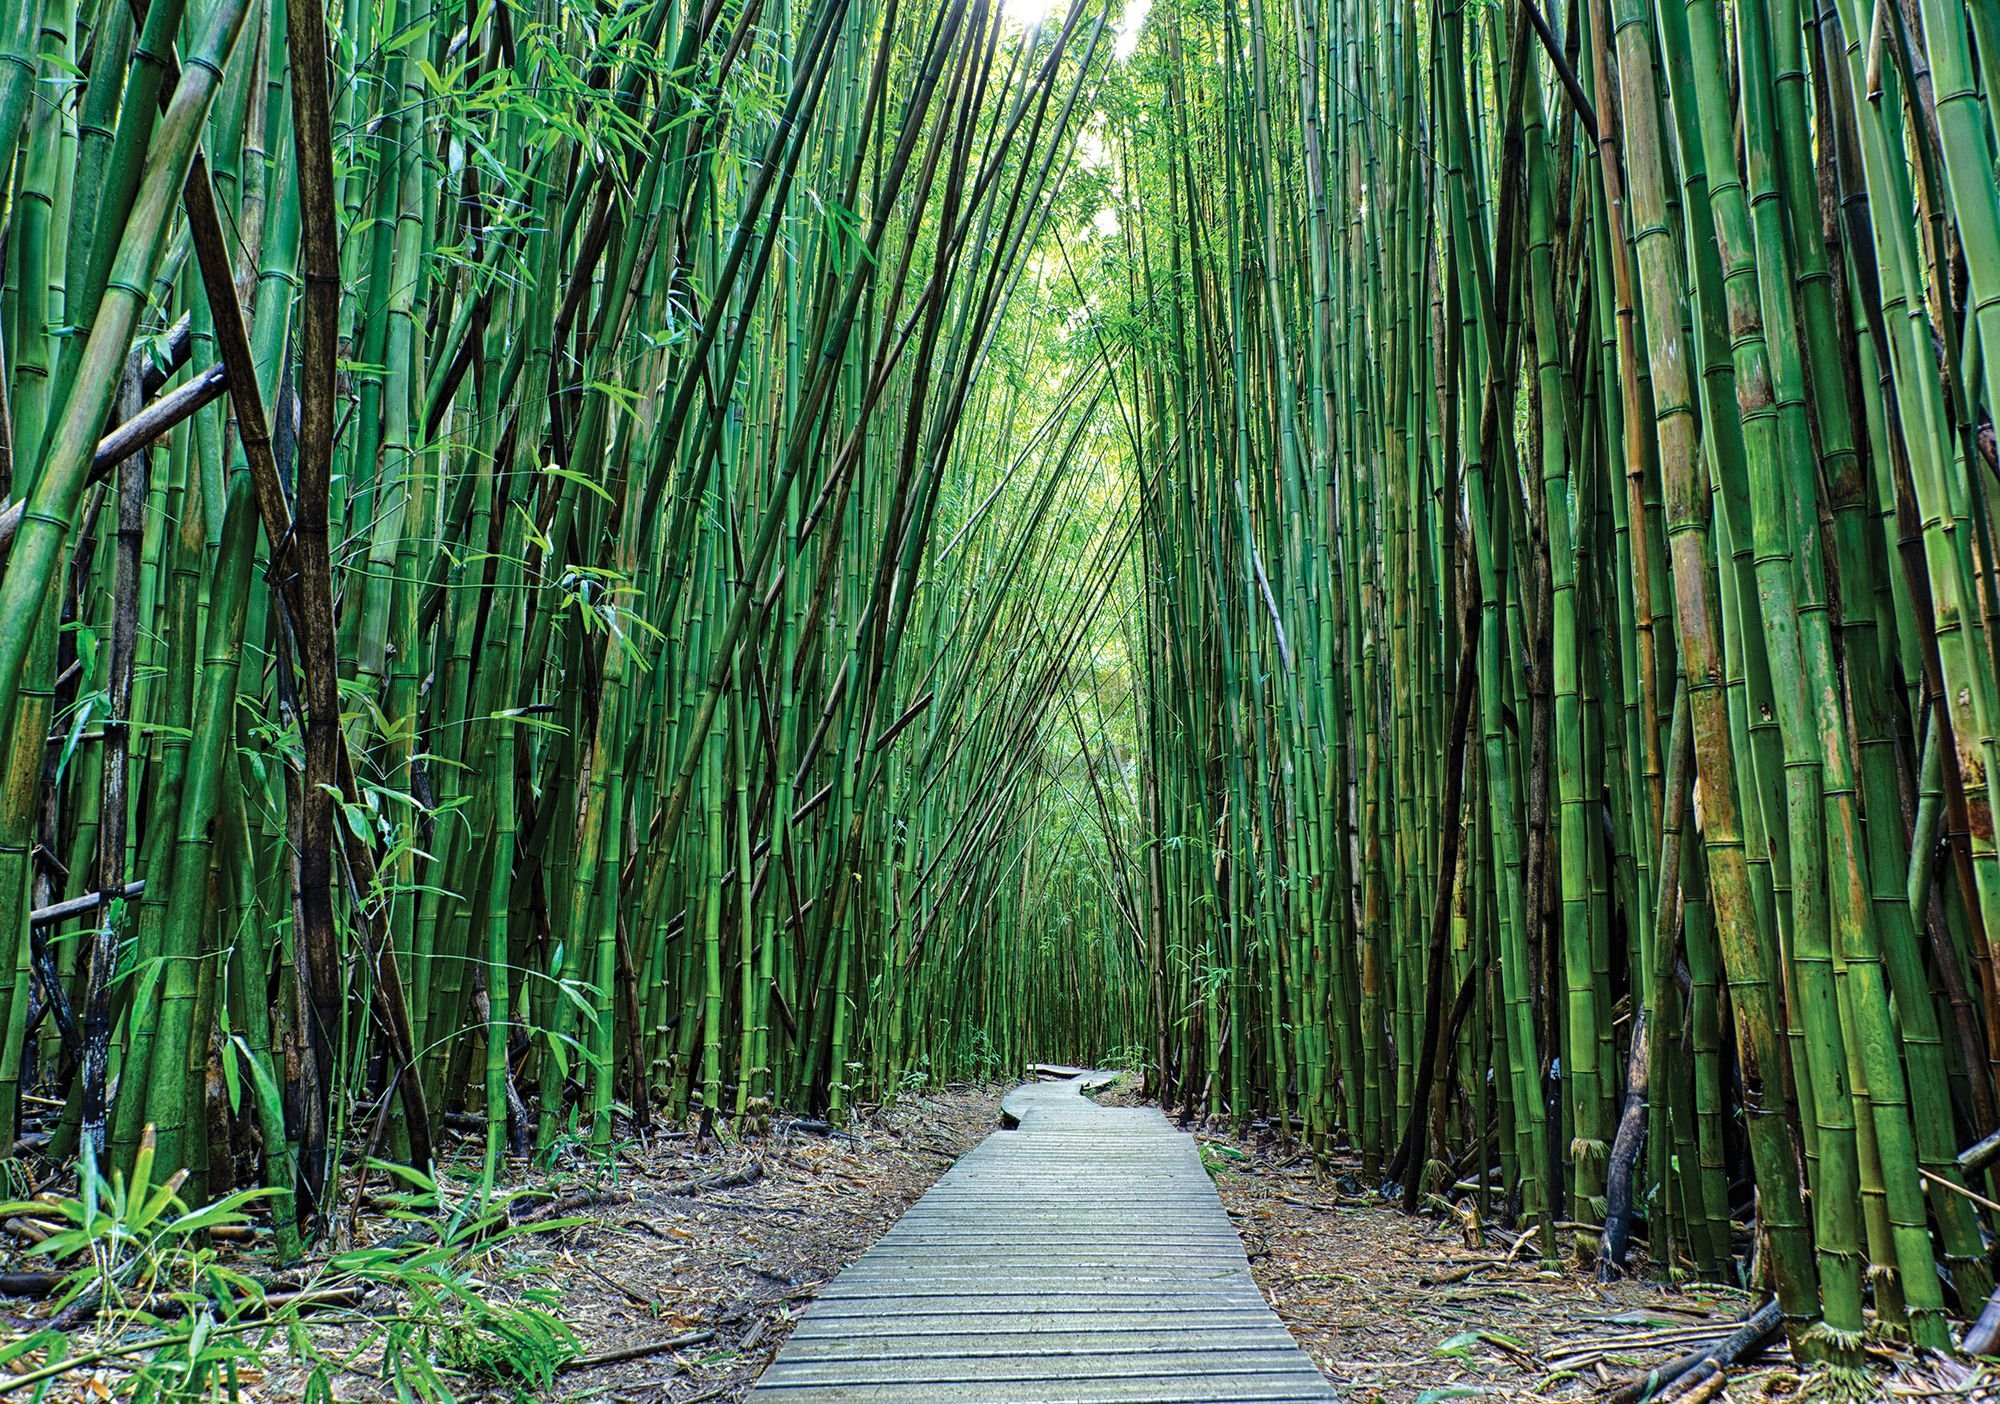 Wall mural: Bamboo forest (2) - 254x368 cm